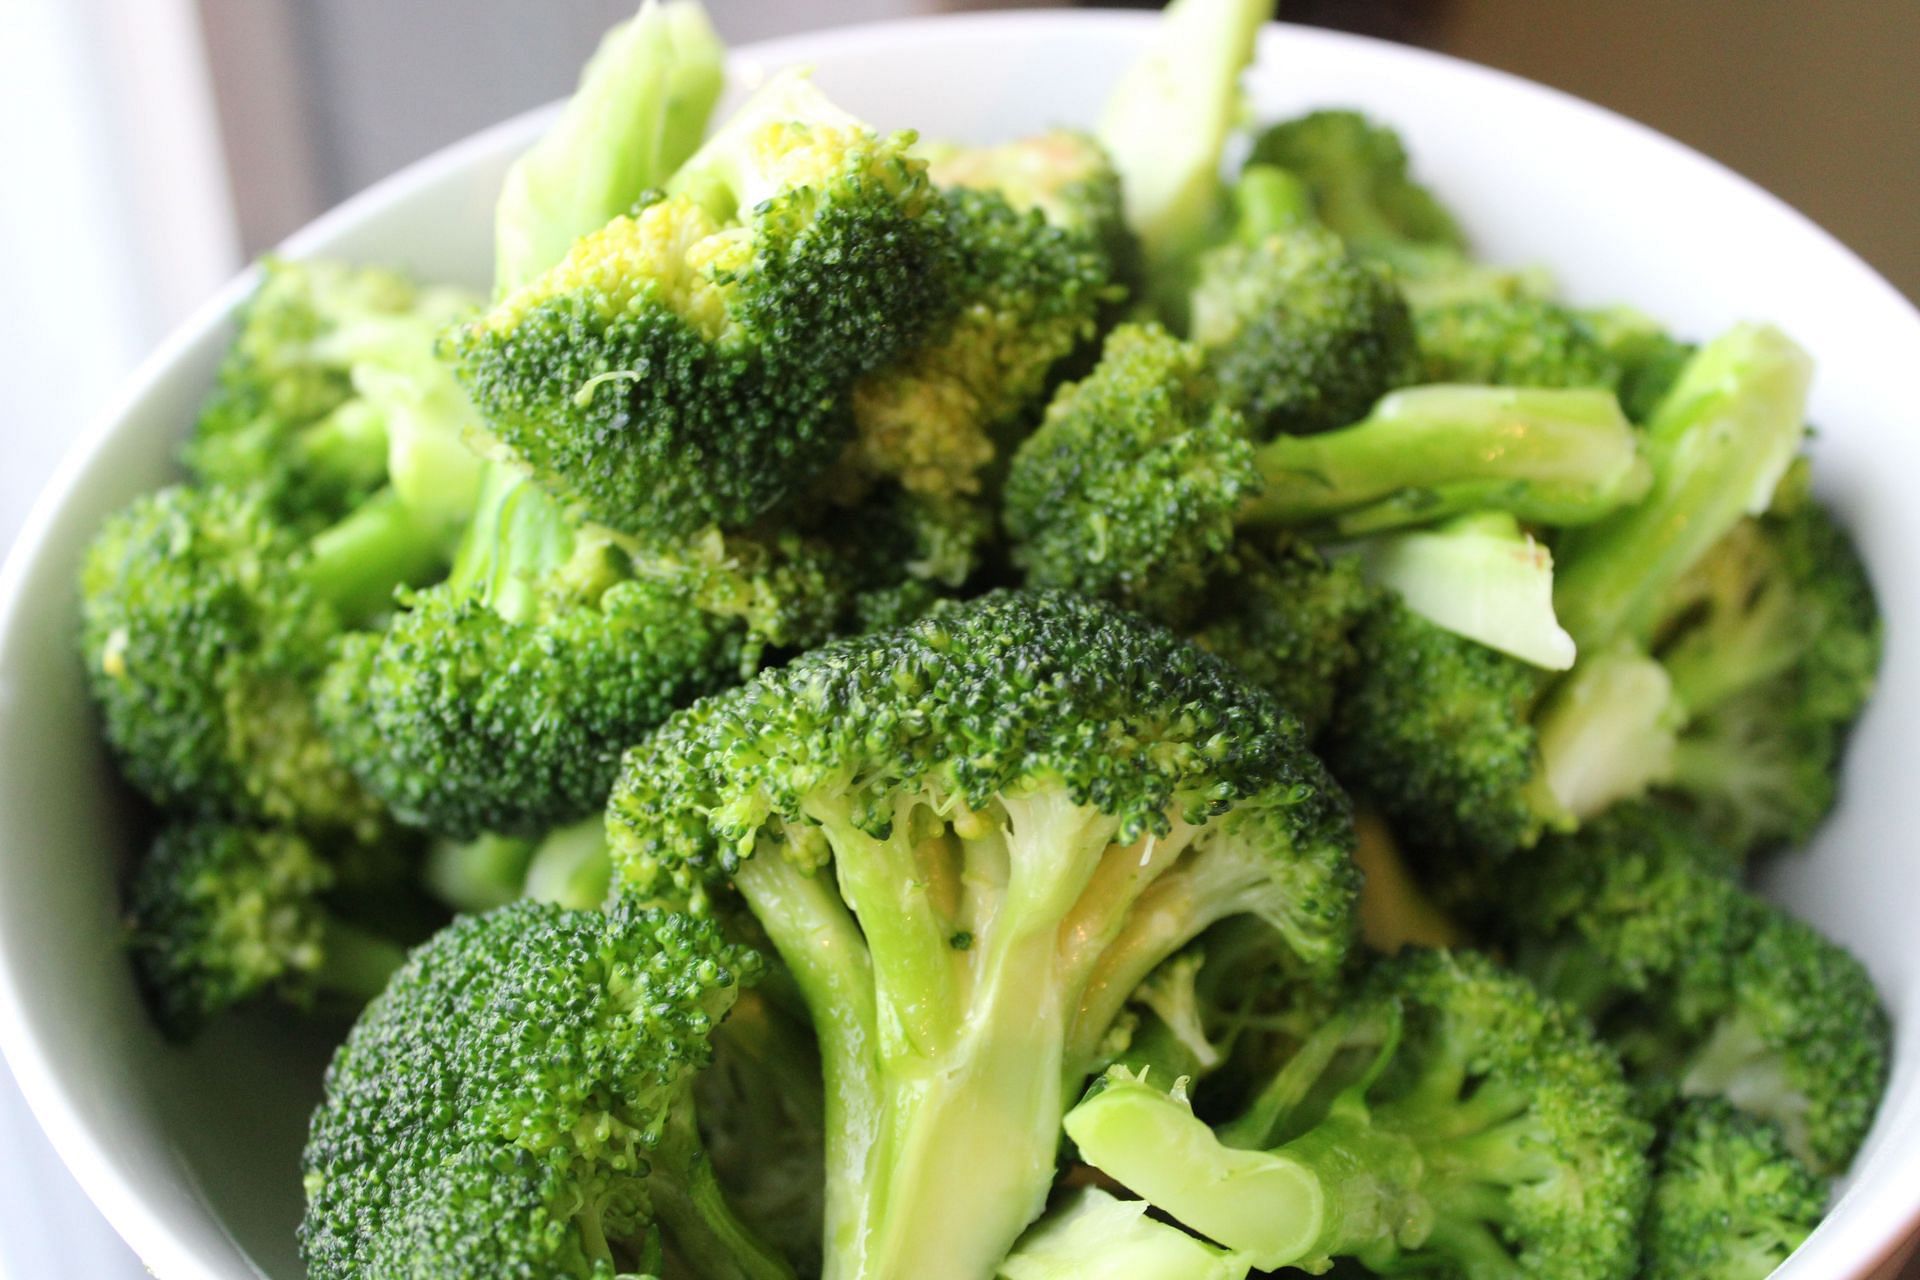 Nutrients in broccoli make it a superfood. (Image via Unsplash/Tyrrell Fitness and Nutrition)